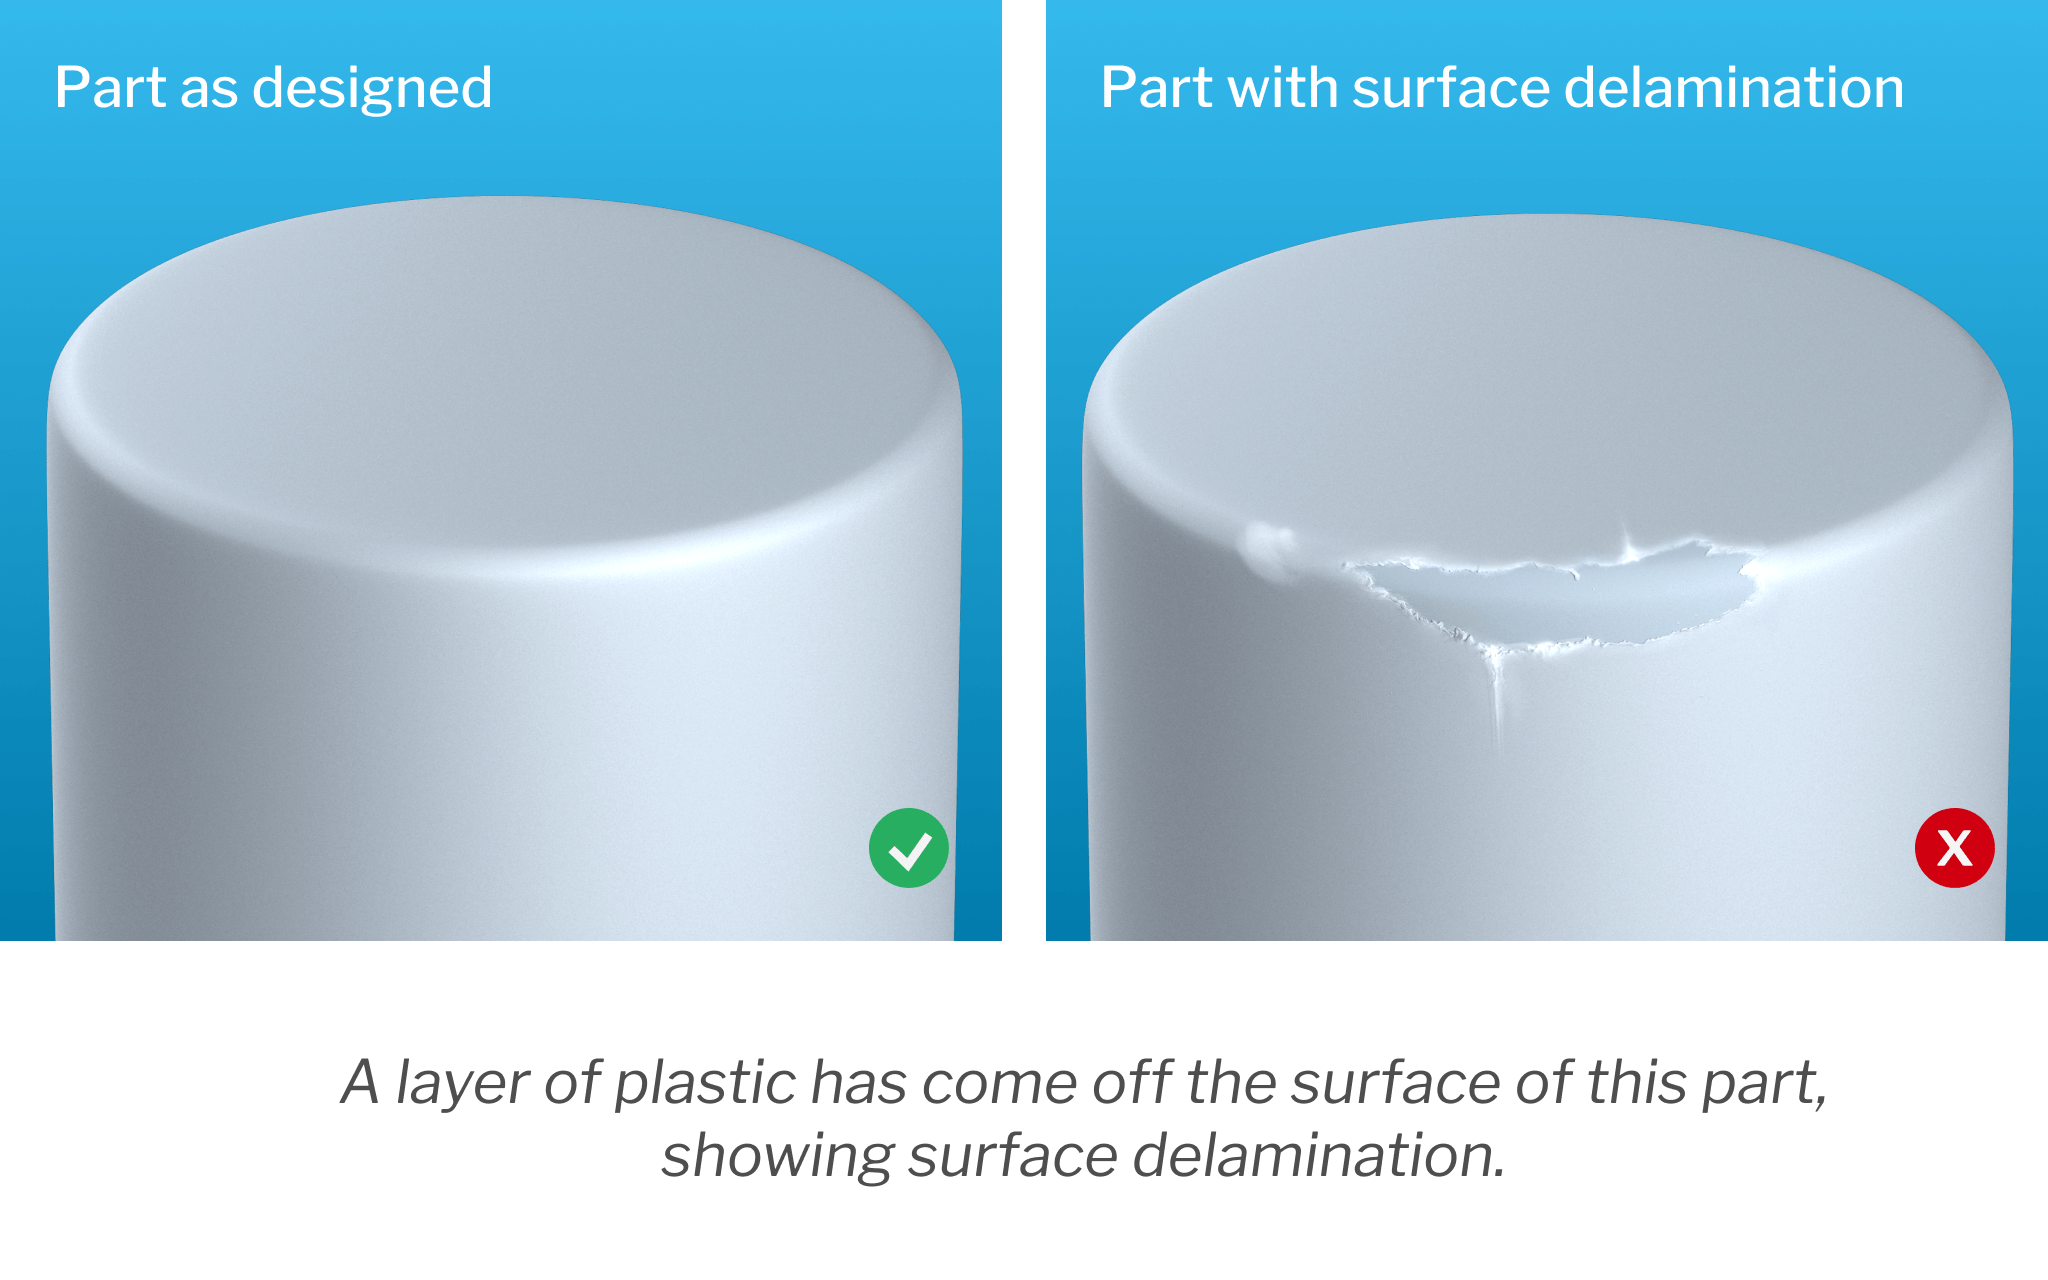 Examples of surface delamination